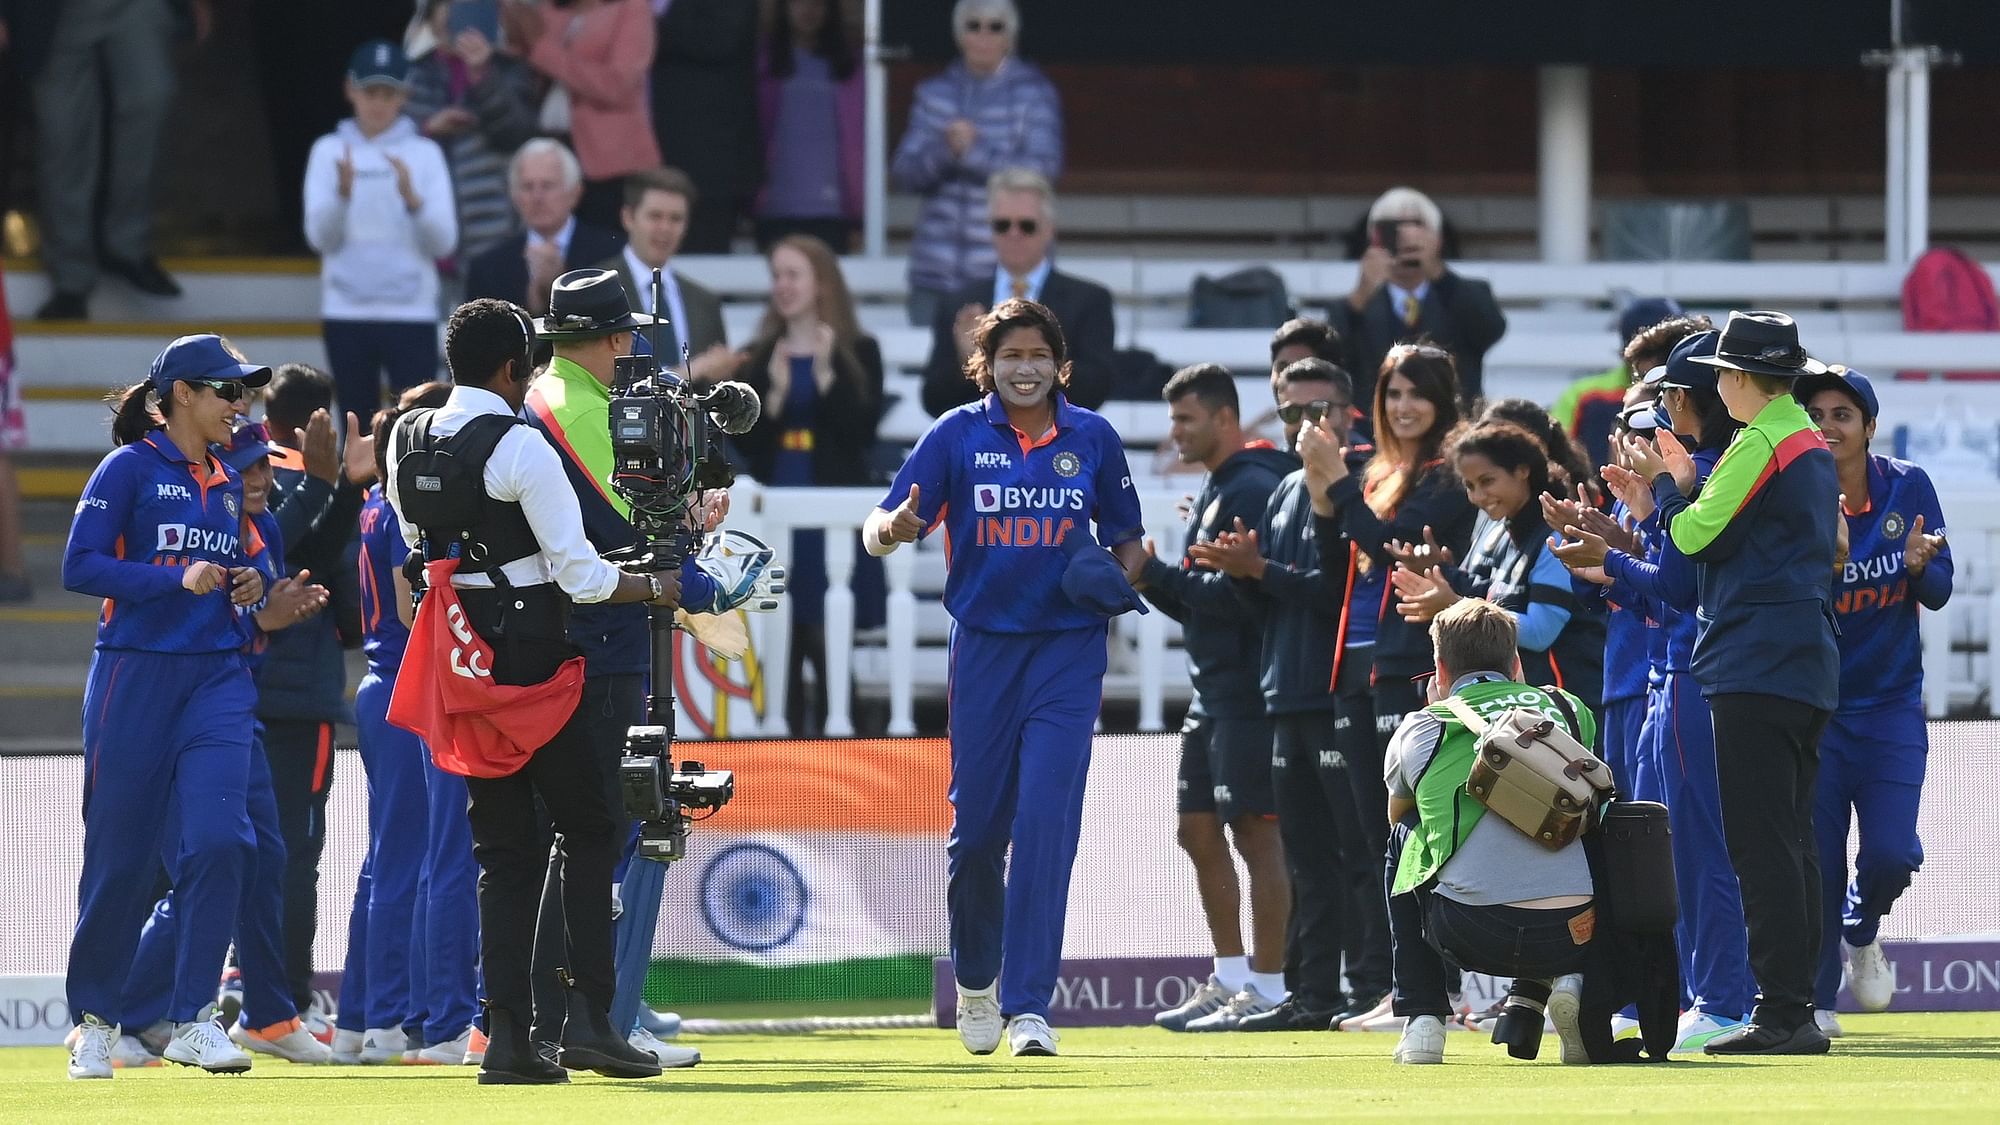 <div class="paragraphs"><p>Jhulan Goswami received a rousing reception as she made her final international appearance at the Lord's on Saturday.&nbsp;&nbsp;</p></div>